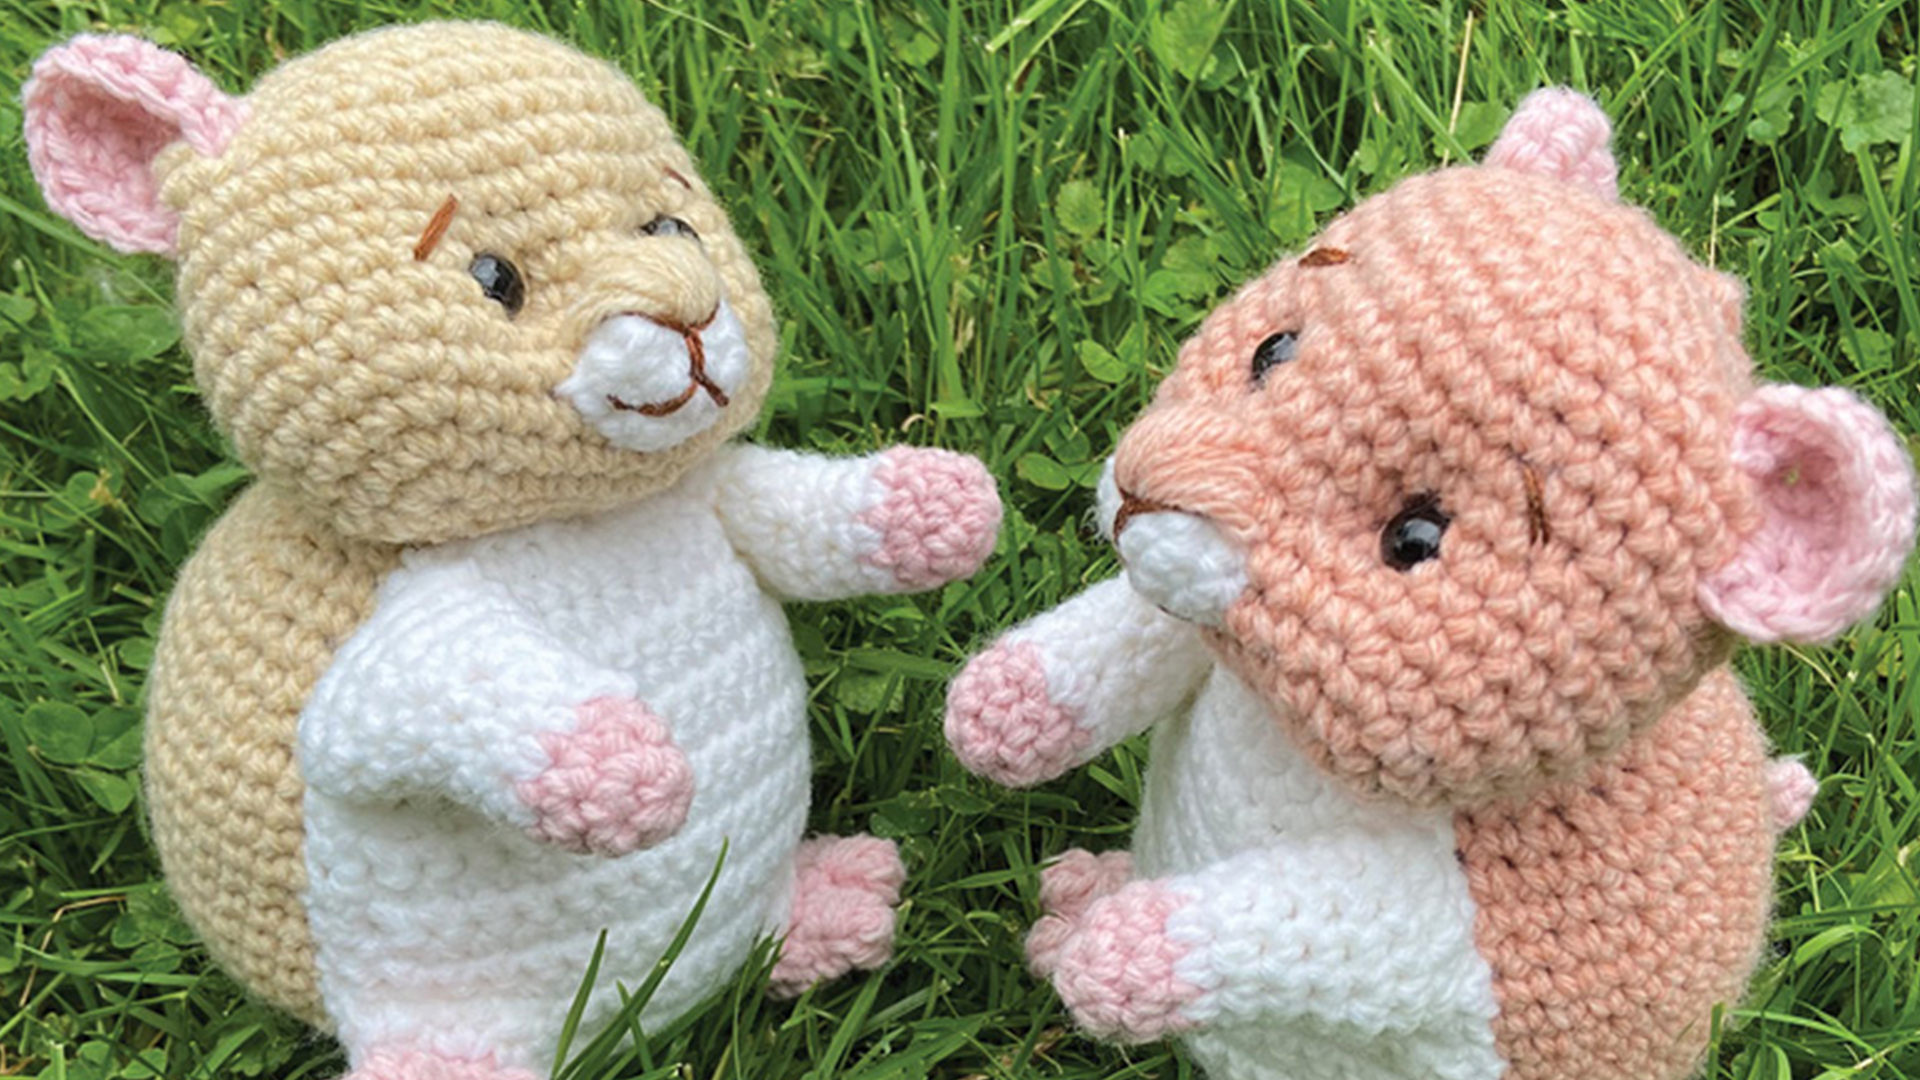 Free Crochet Pattern - Peachfuzz and Butter, Crocheted Hamsters